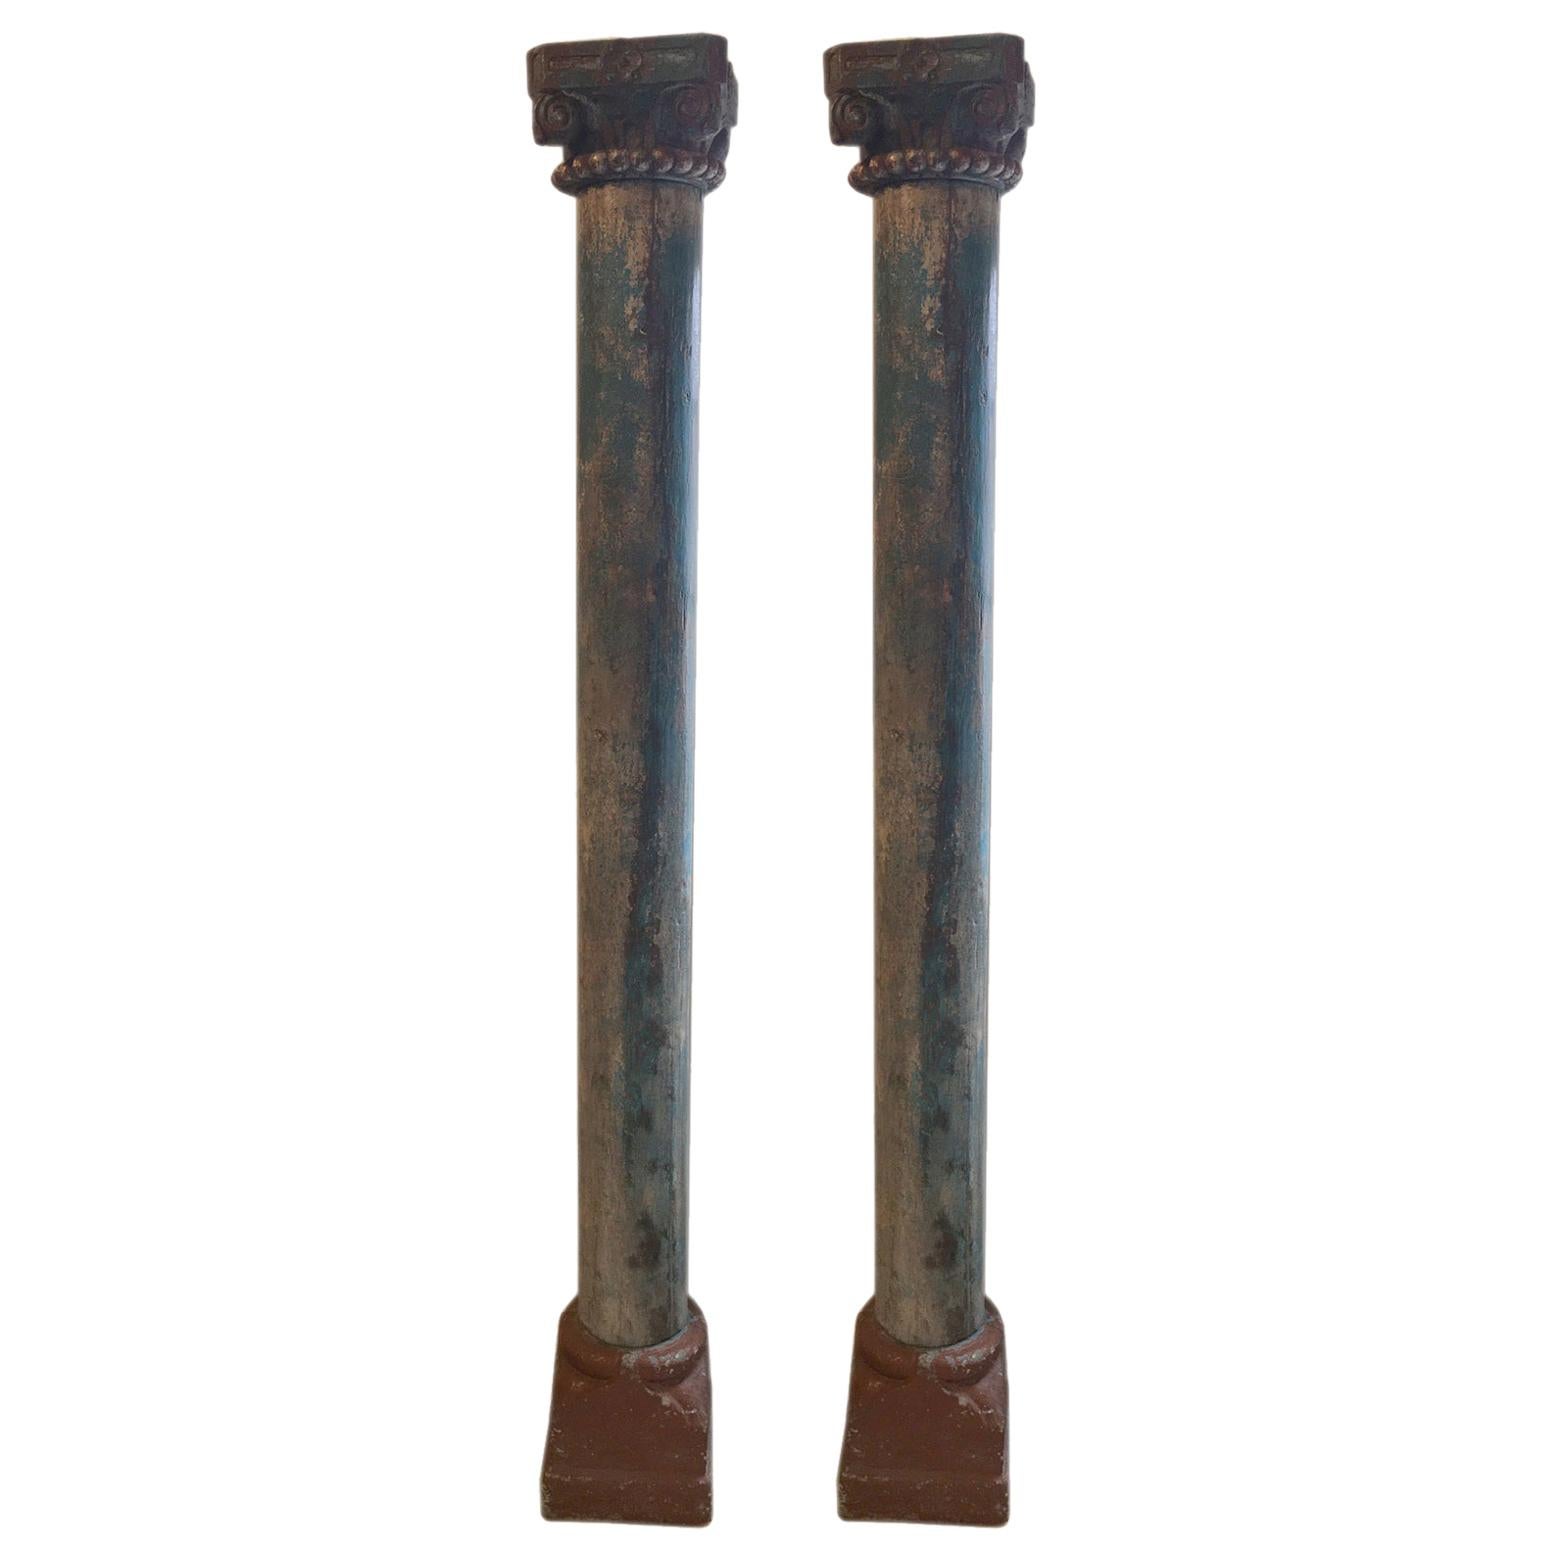 Pair of 19th Century, Teak Columns with Original Paint on Stone Bases